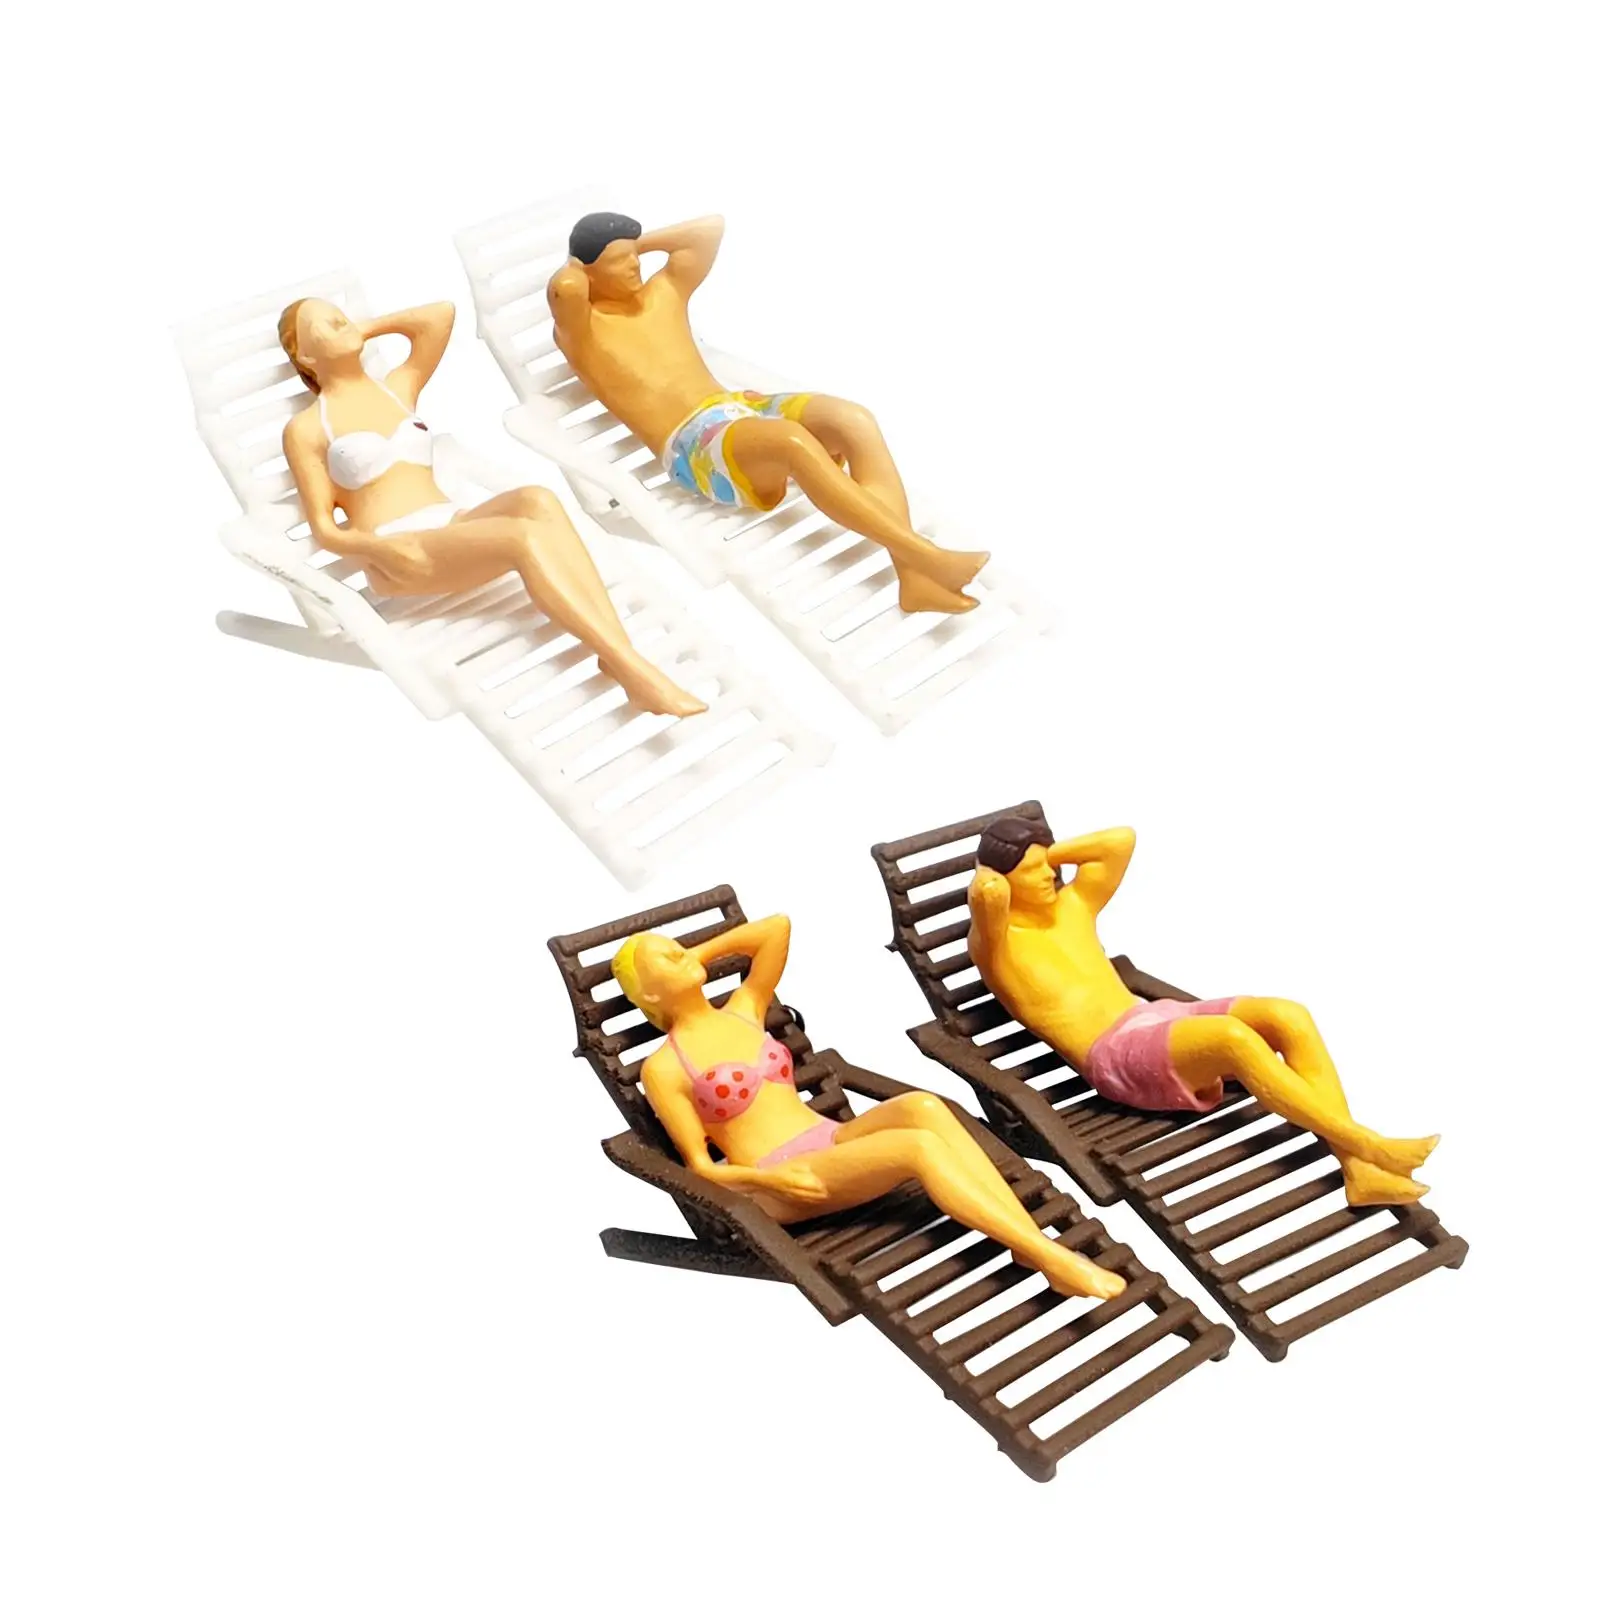 1/64 Scale People Figures Set Tiny People Miniature Longue Mini People Model Mini Beach Chair for Sand Table DIY Projects Layout